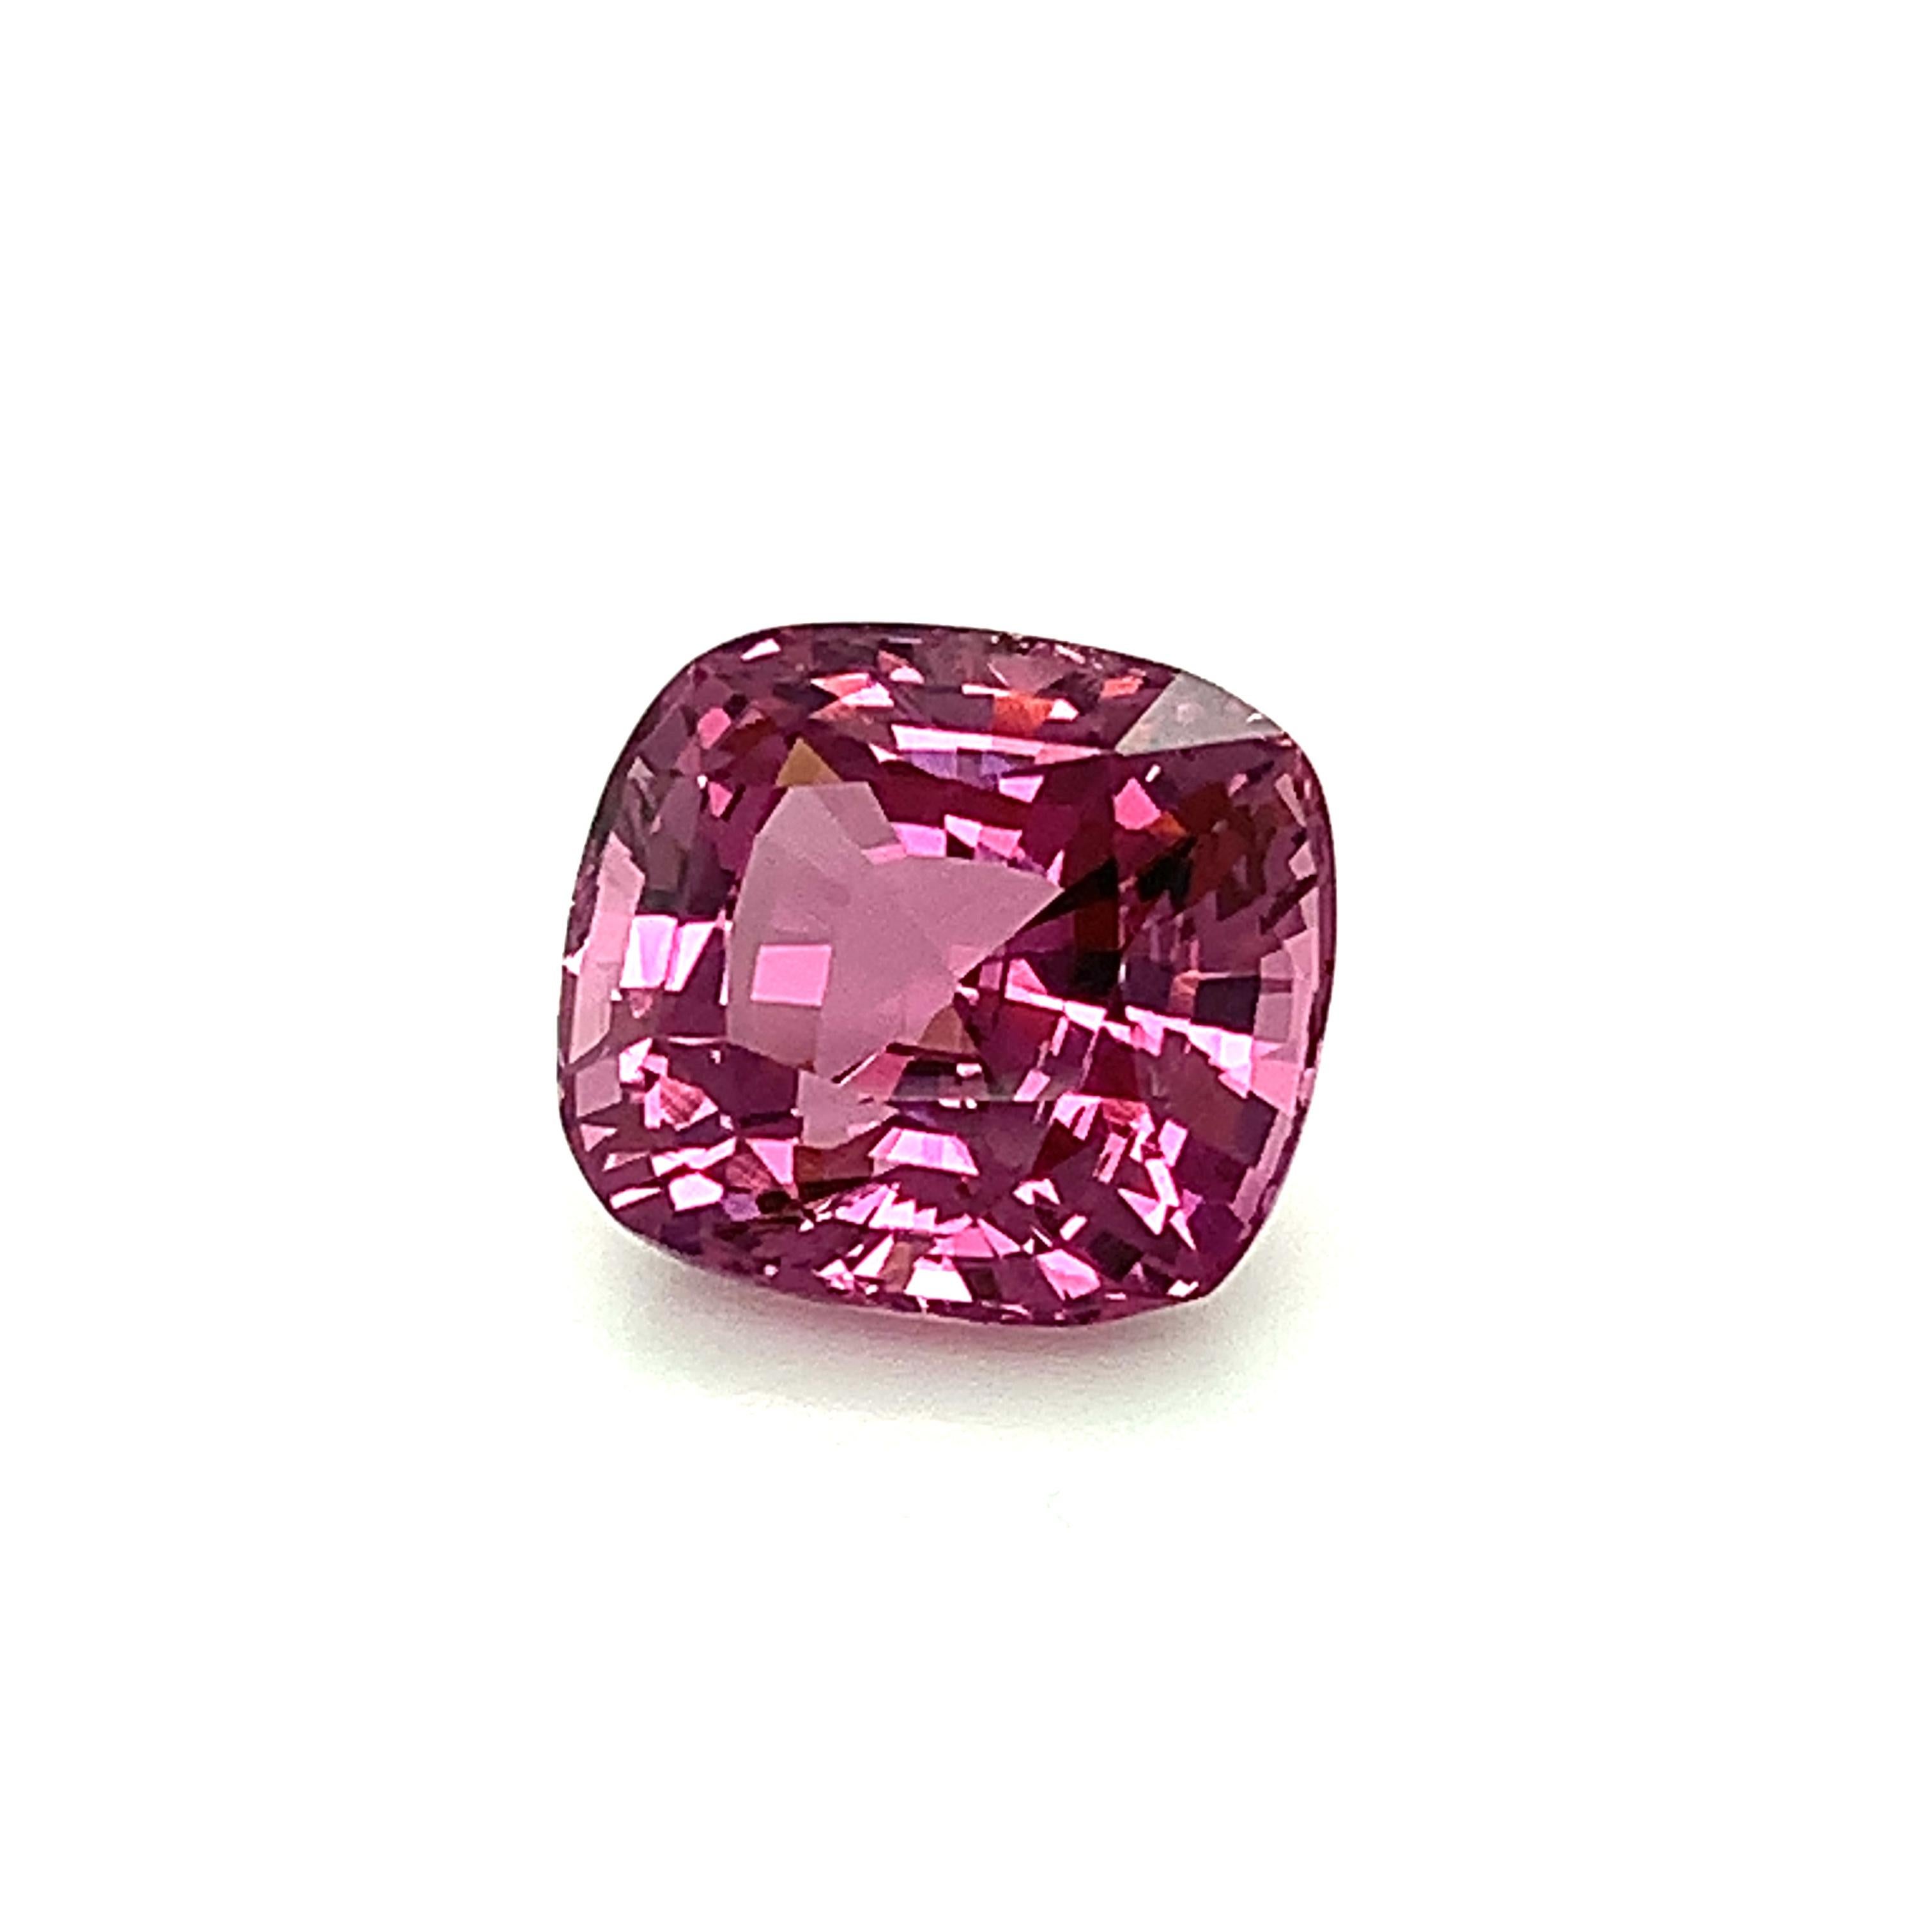 Cushion Cut Unheated 10.21 Carat Pink Purple Spinel, Loose Gemstone, GIA Certified ...A For Sale